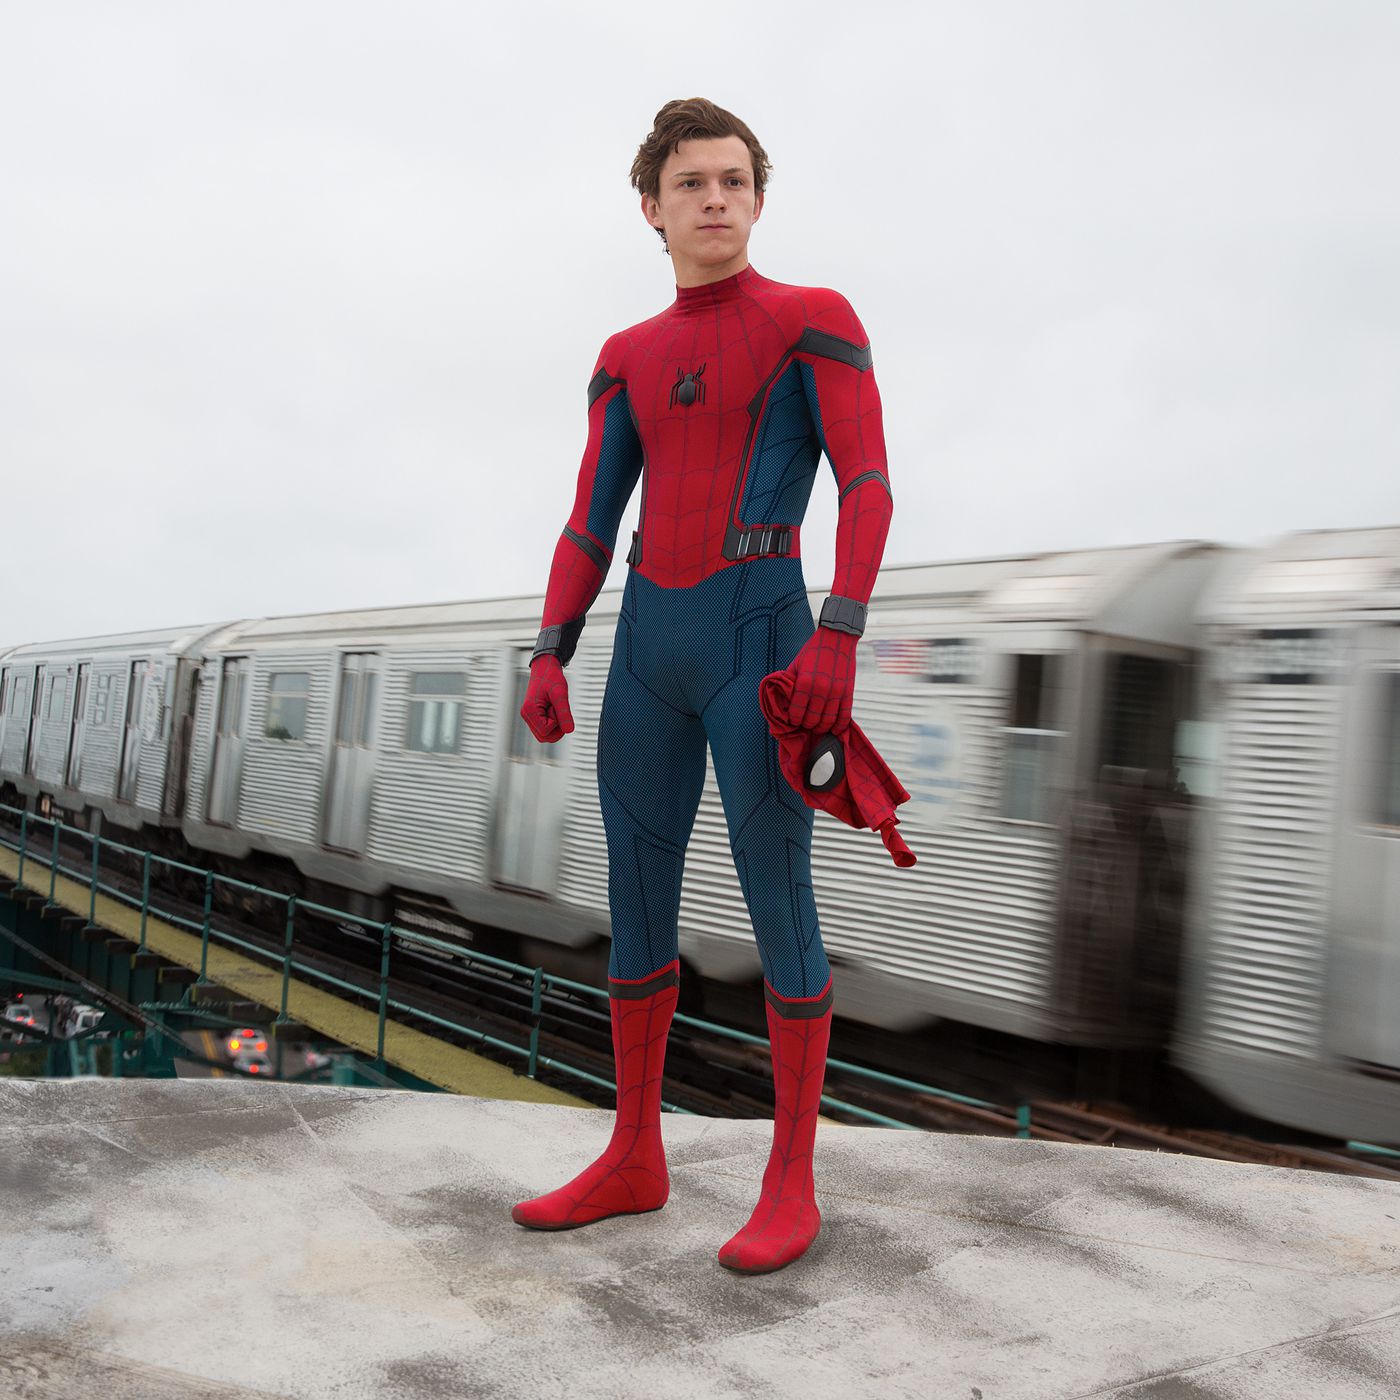 Spider-Man Homecoming Review: Rebooting Done Well